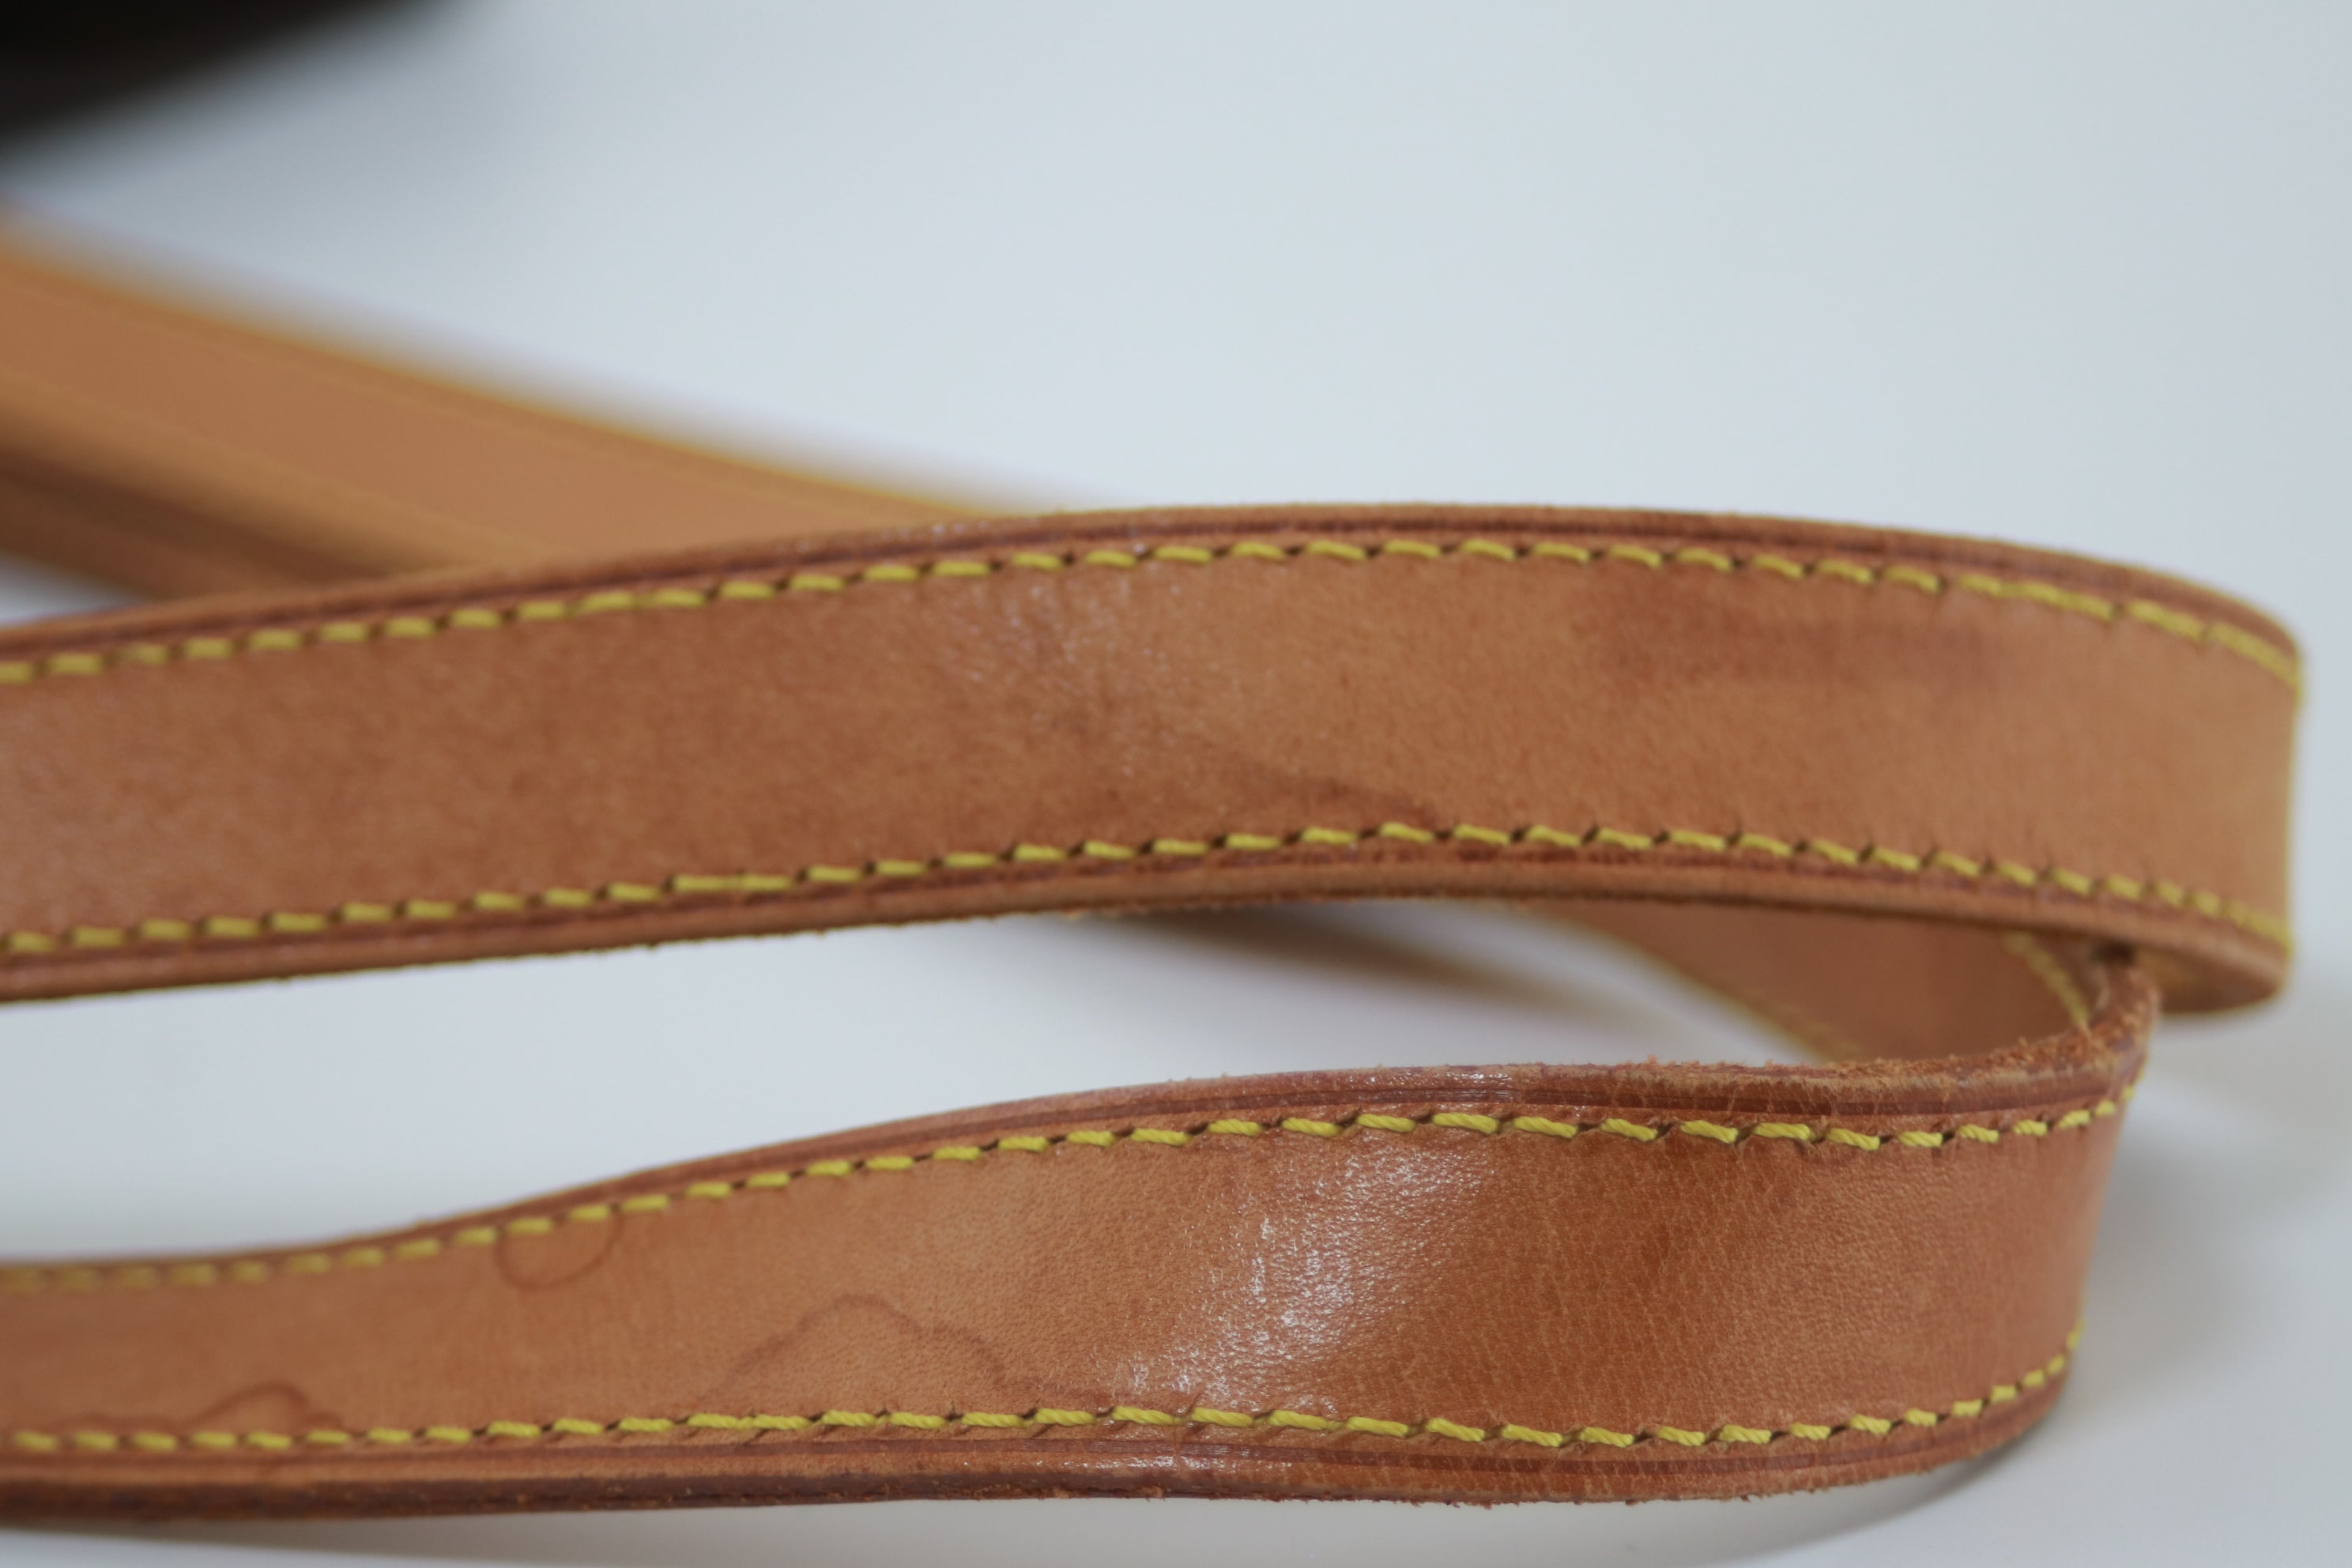 44 Vachetta Leather Crossbody Strap Replacement for 